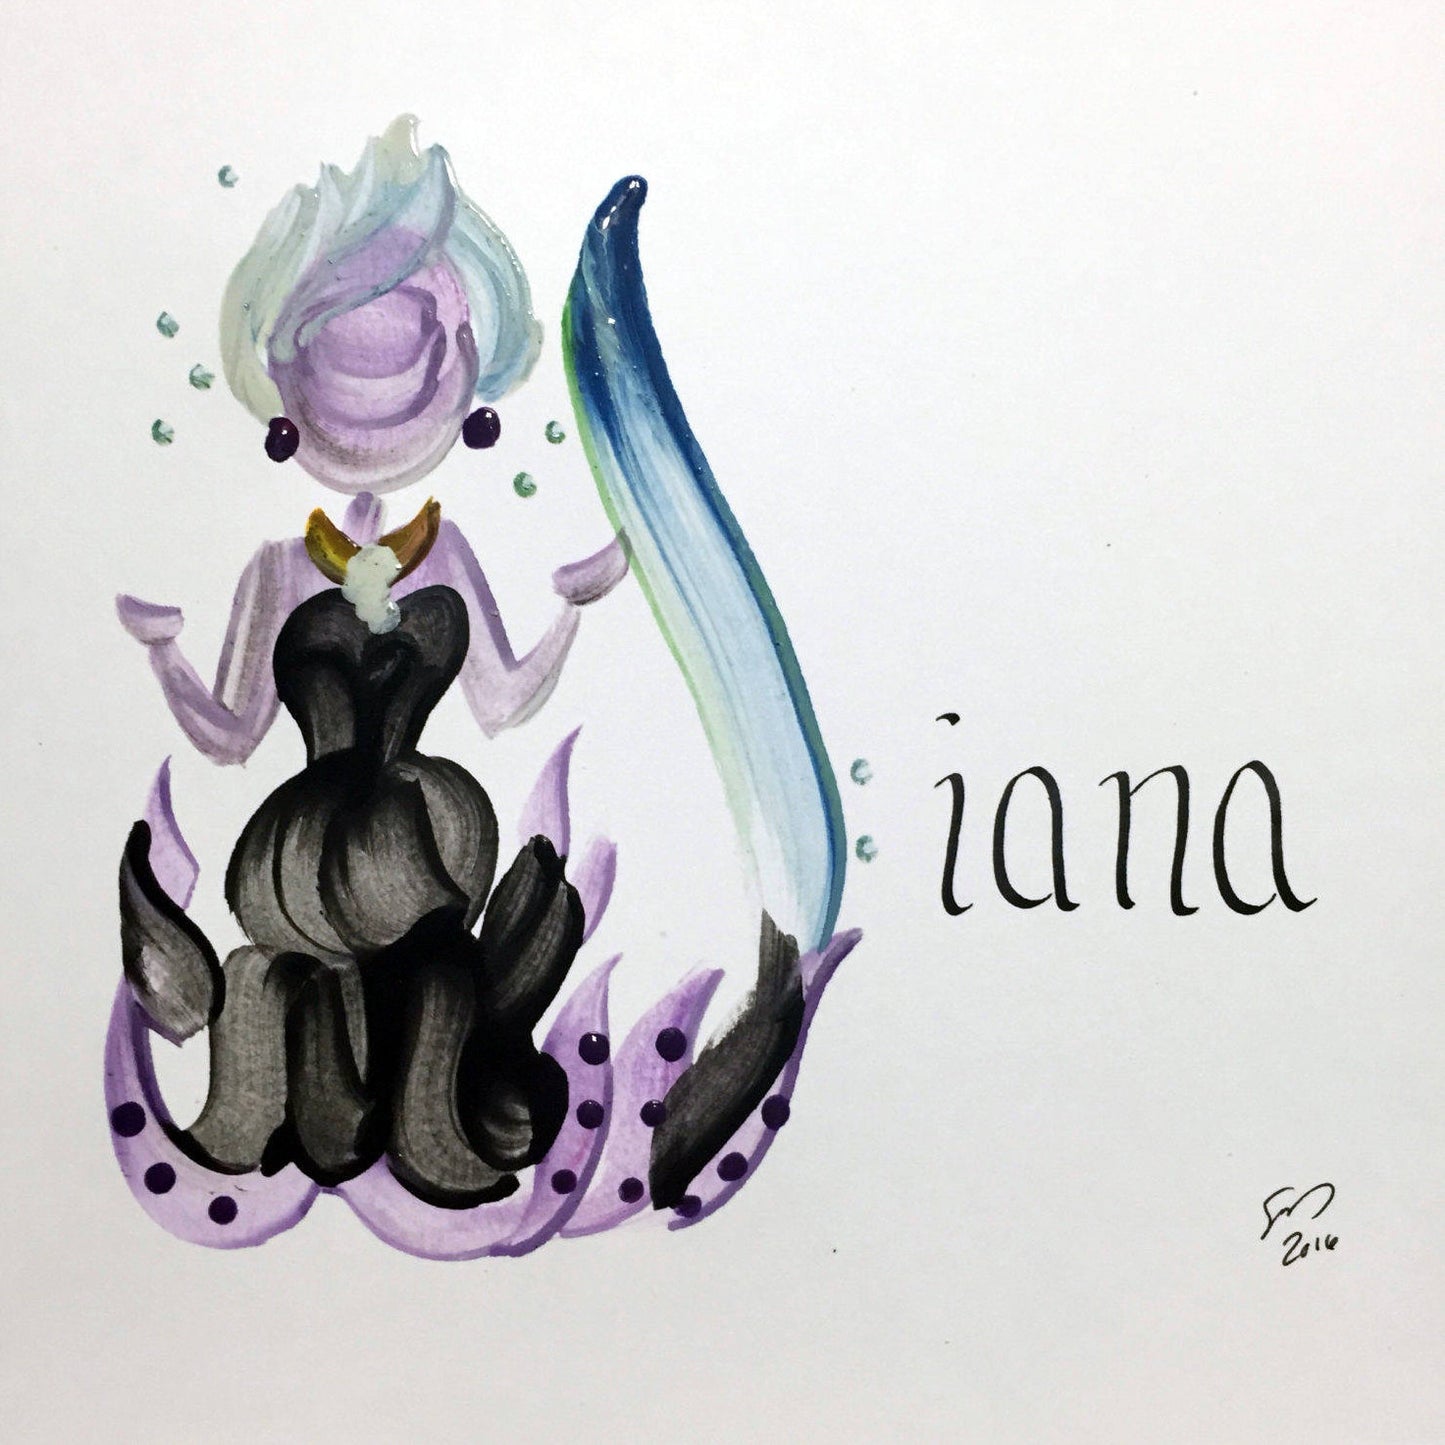 Single painted character of a sea witch with the name "Diana"